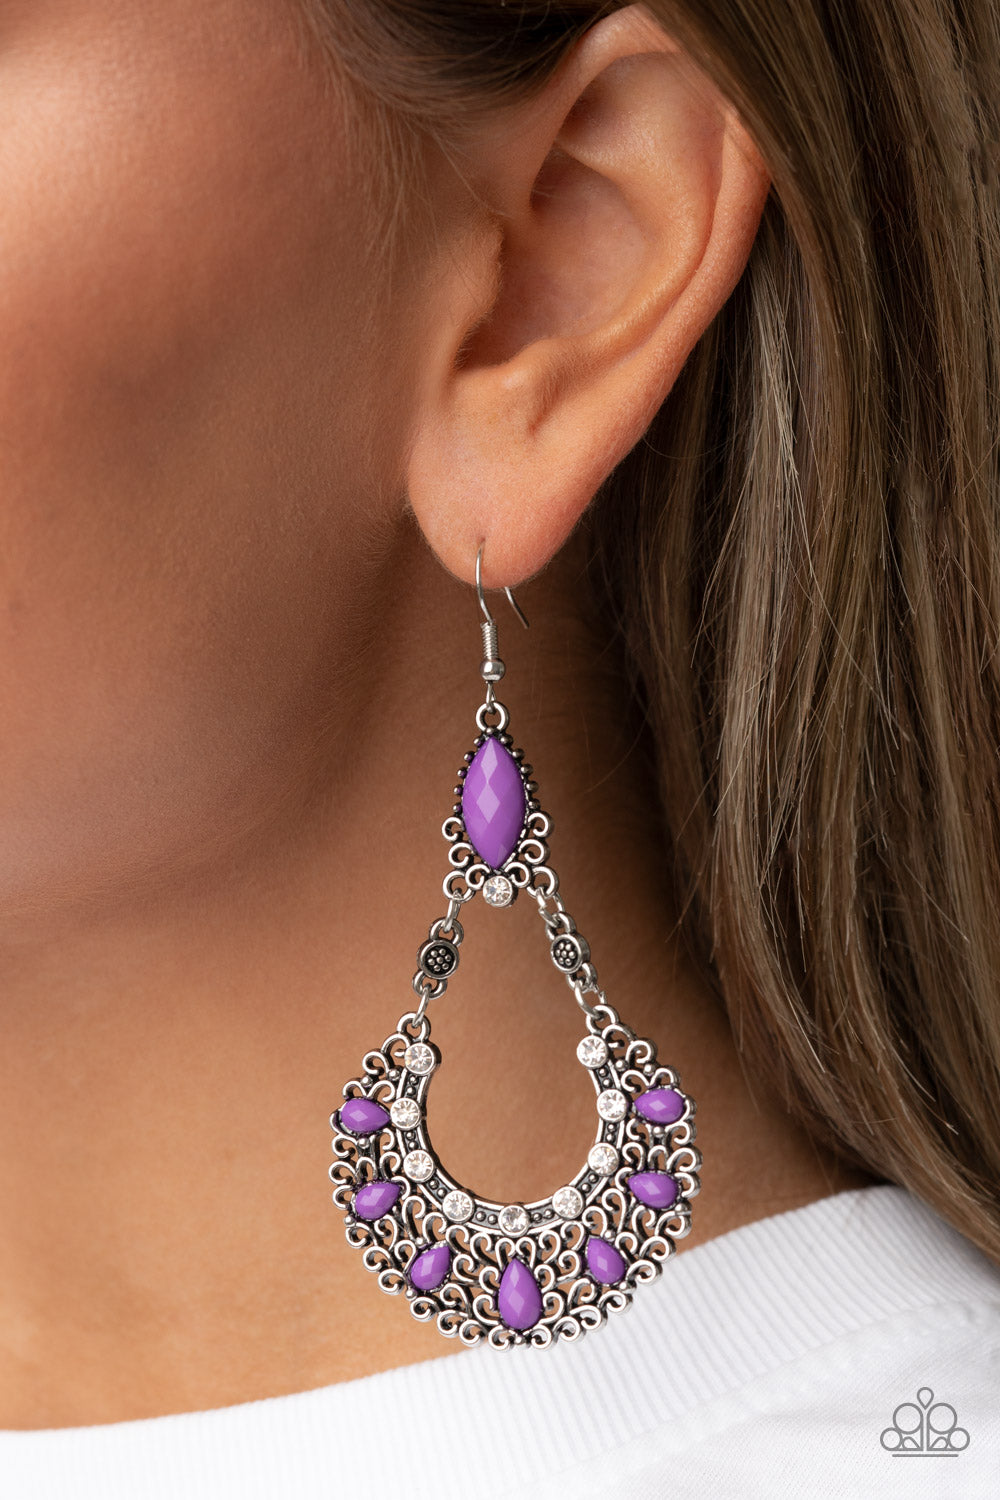 Fluent in Florals - Purple and Silver Fashion Earrings - Paparazzi Accessories - Purple beads and dainty white rhinestones, a filigree filled silver wreath swings from the bottom of a matching purple bead for a whimsical fashion. Earring attaches to a standard fishhook fitting. 